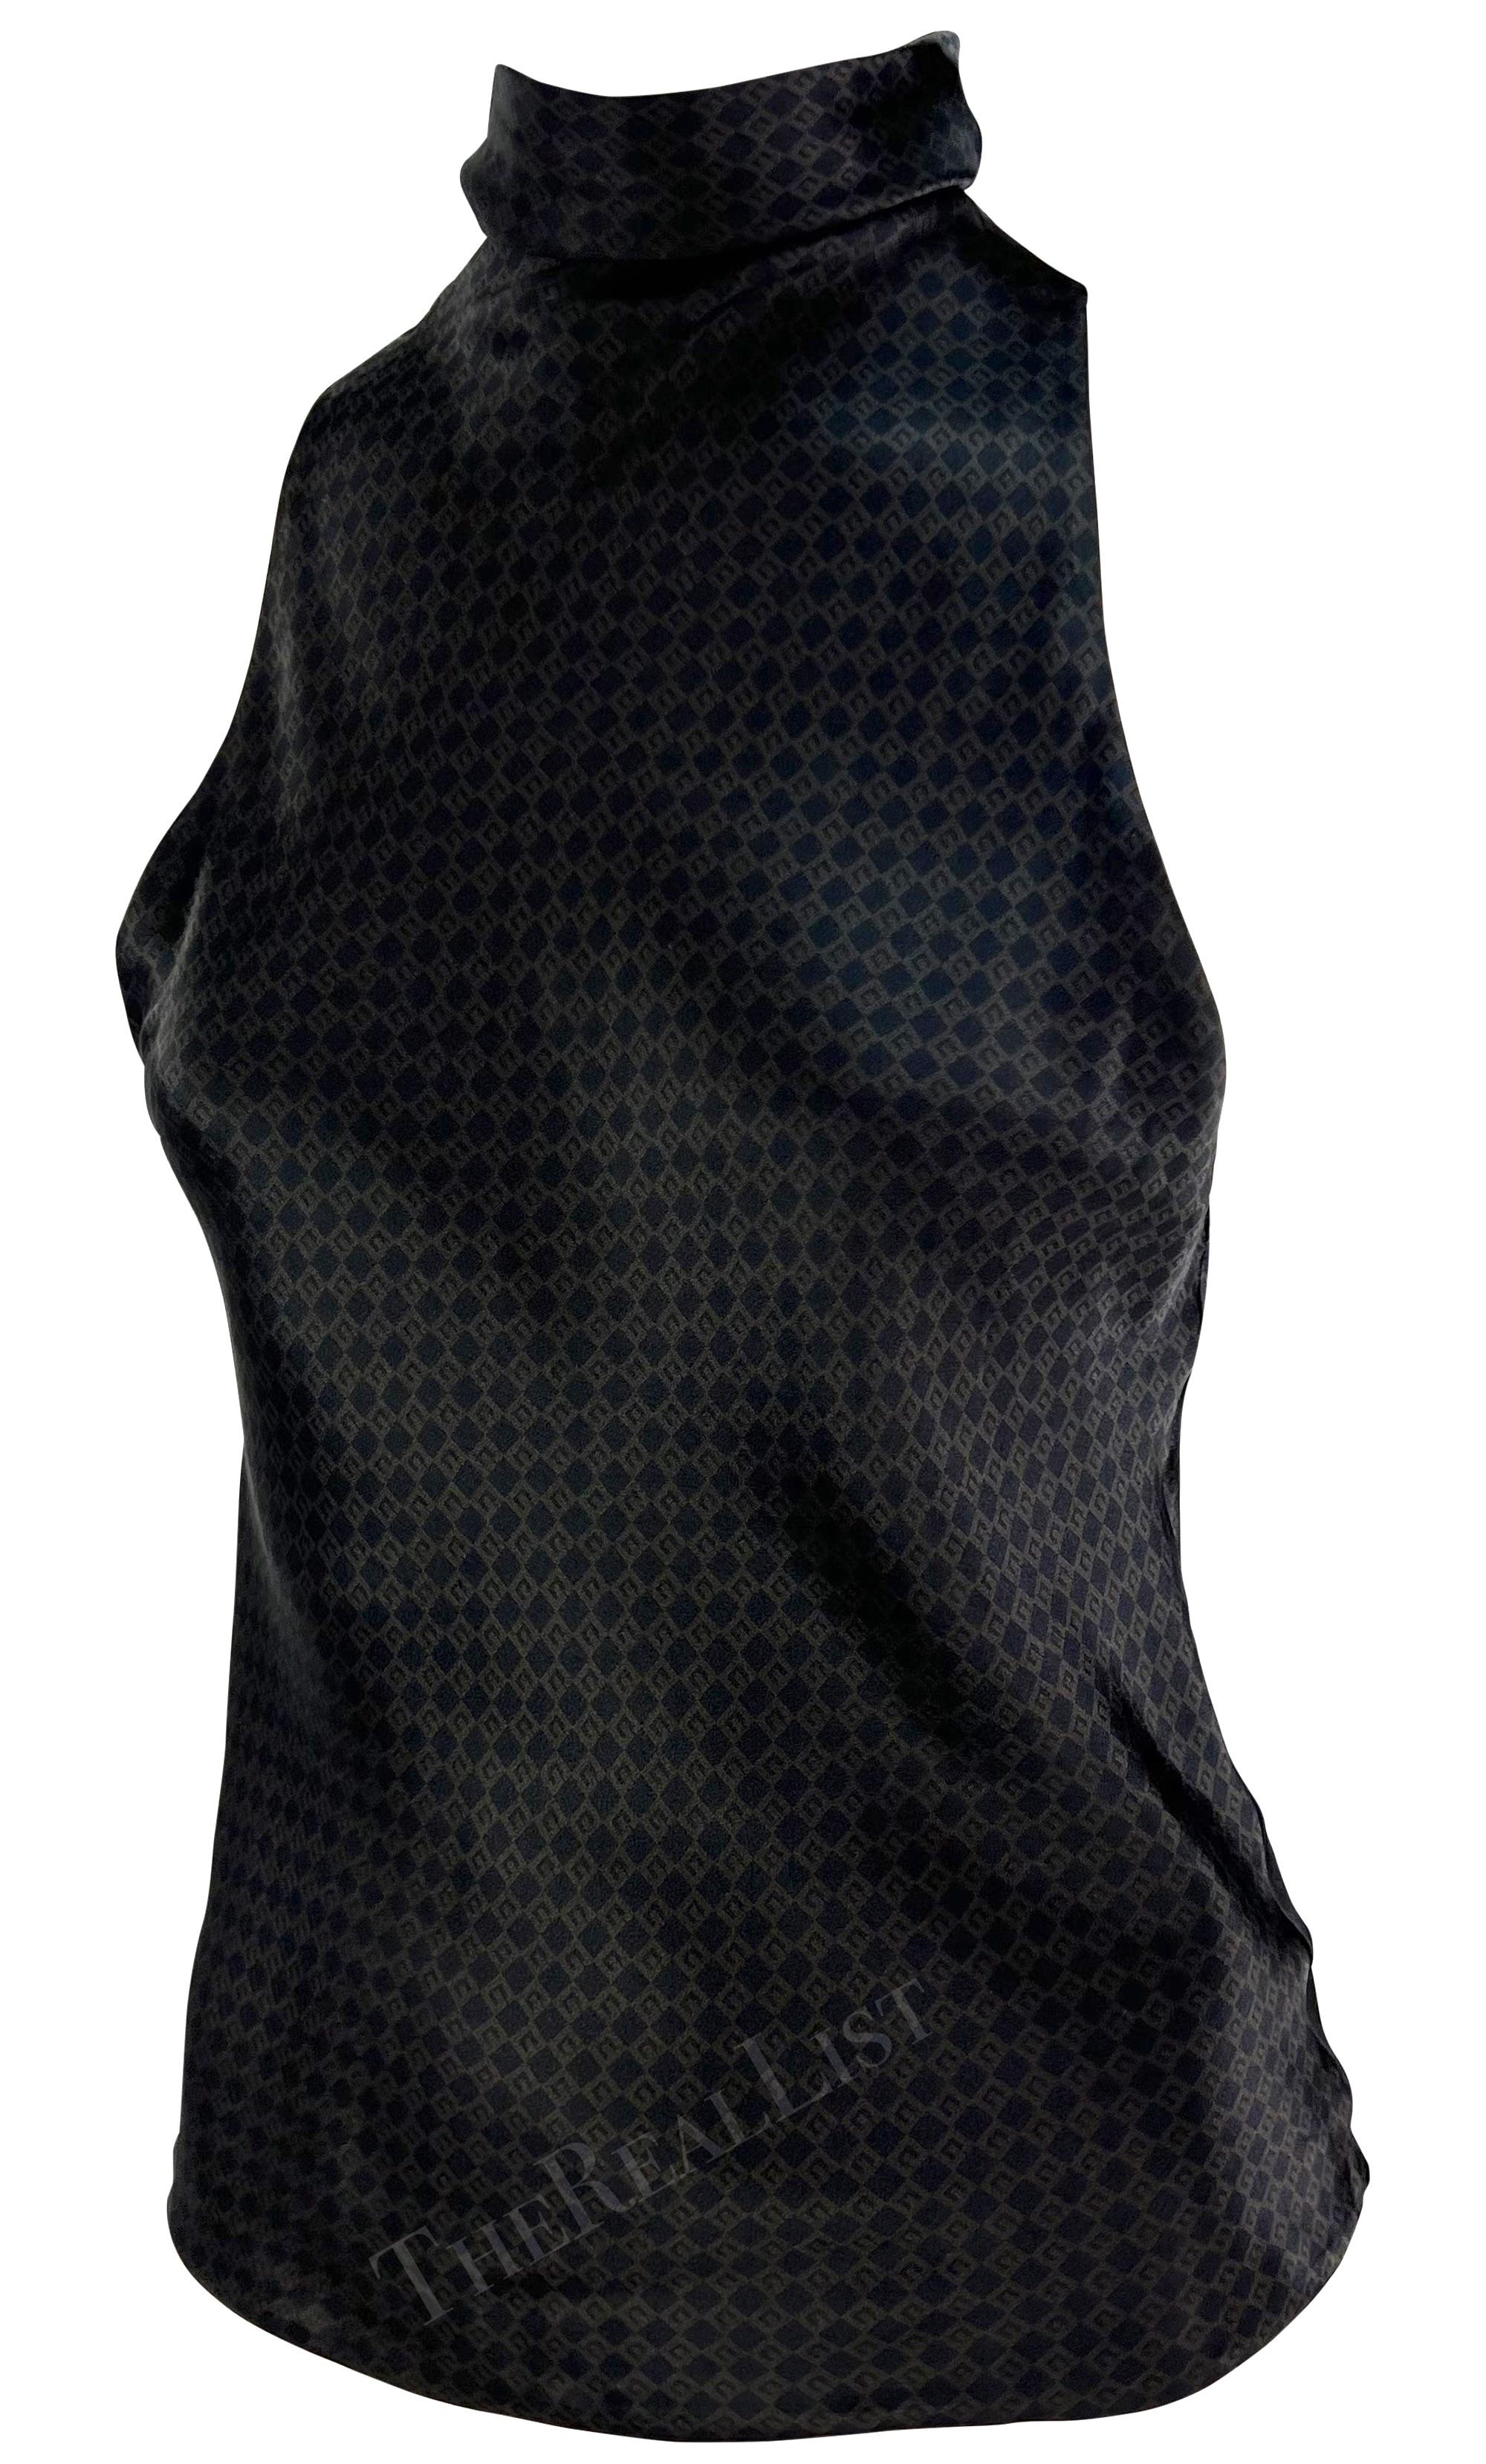 Presenting a brown silk Gucci 'G' monogram sleeveless top, designed by Tom Ford. From the Fall/Winter 2000 collection, this sleeveless top is covered in a square 'G' monogram pattern and features a mock neck. The top is made complete with gold hook